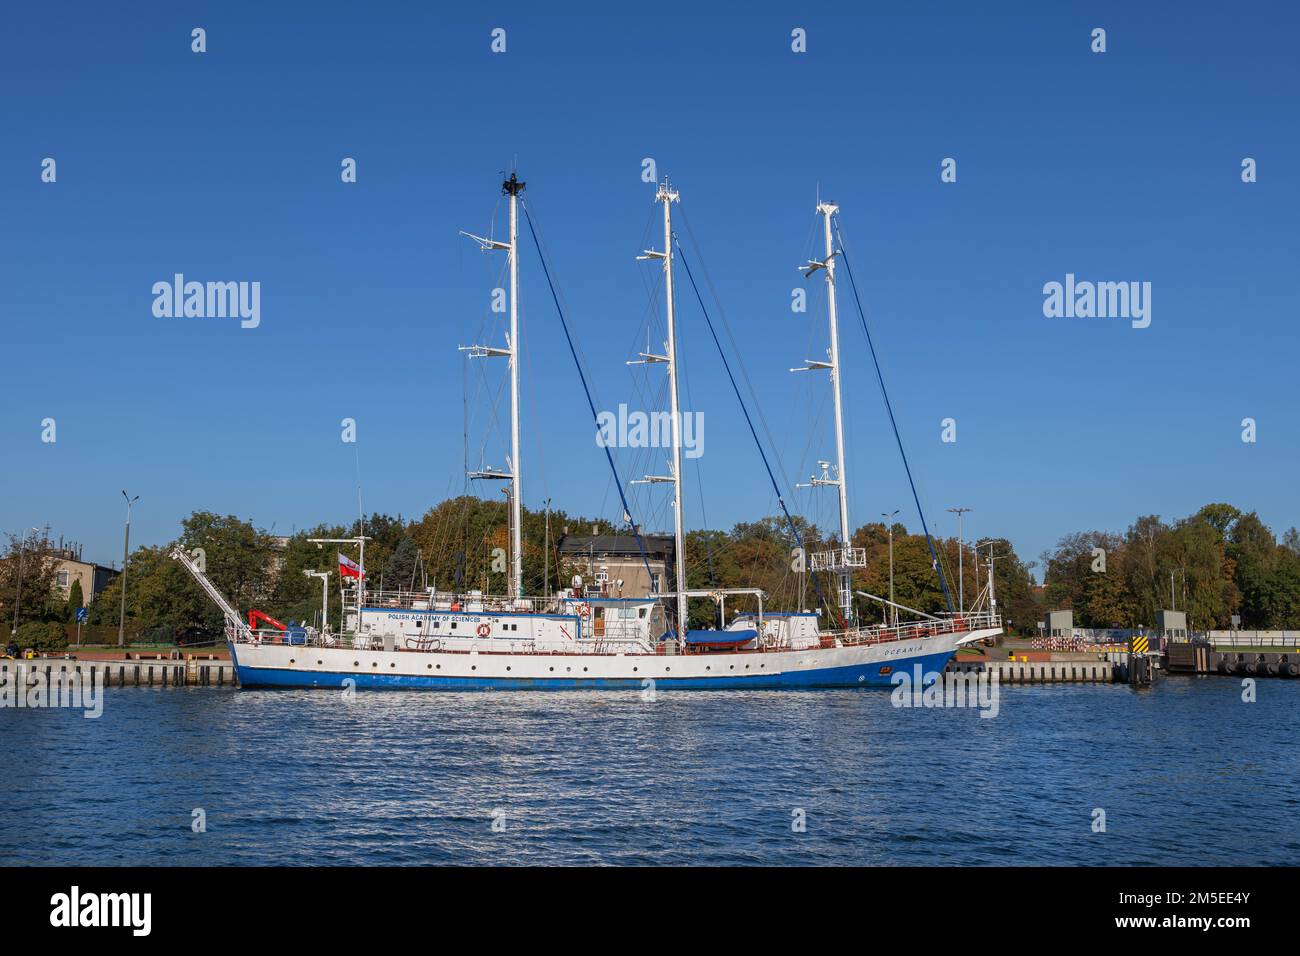 RV Oceania (SY Oceania) tall ship, owned by the Polish Academy of Sciences (PAN), used as a research vessel, moored in port of Gdansk, Poland. Stock Photo